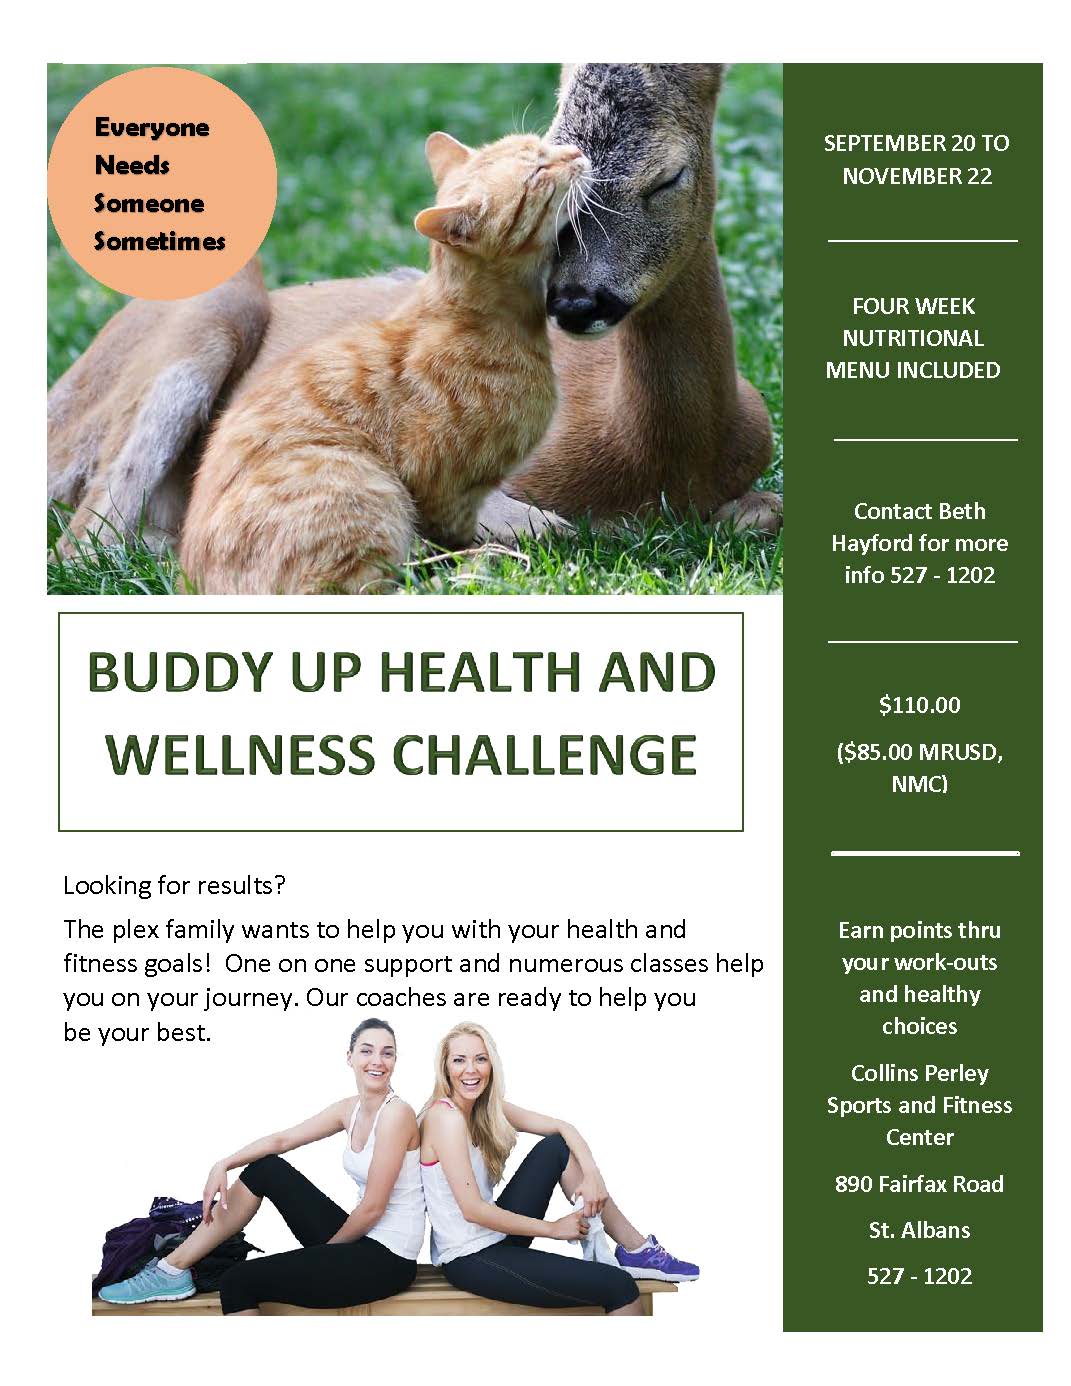 Buddy Up Challenge Overview